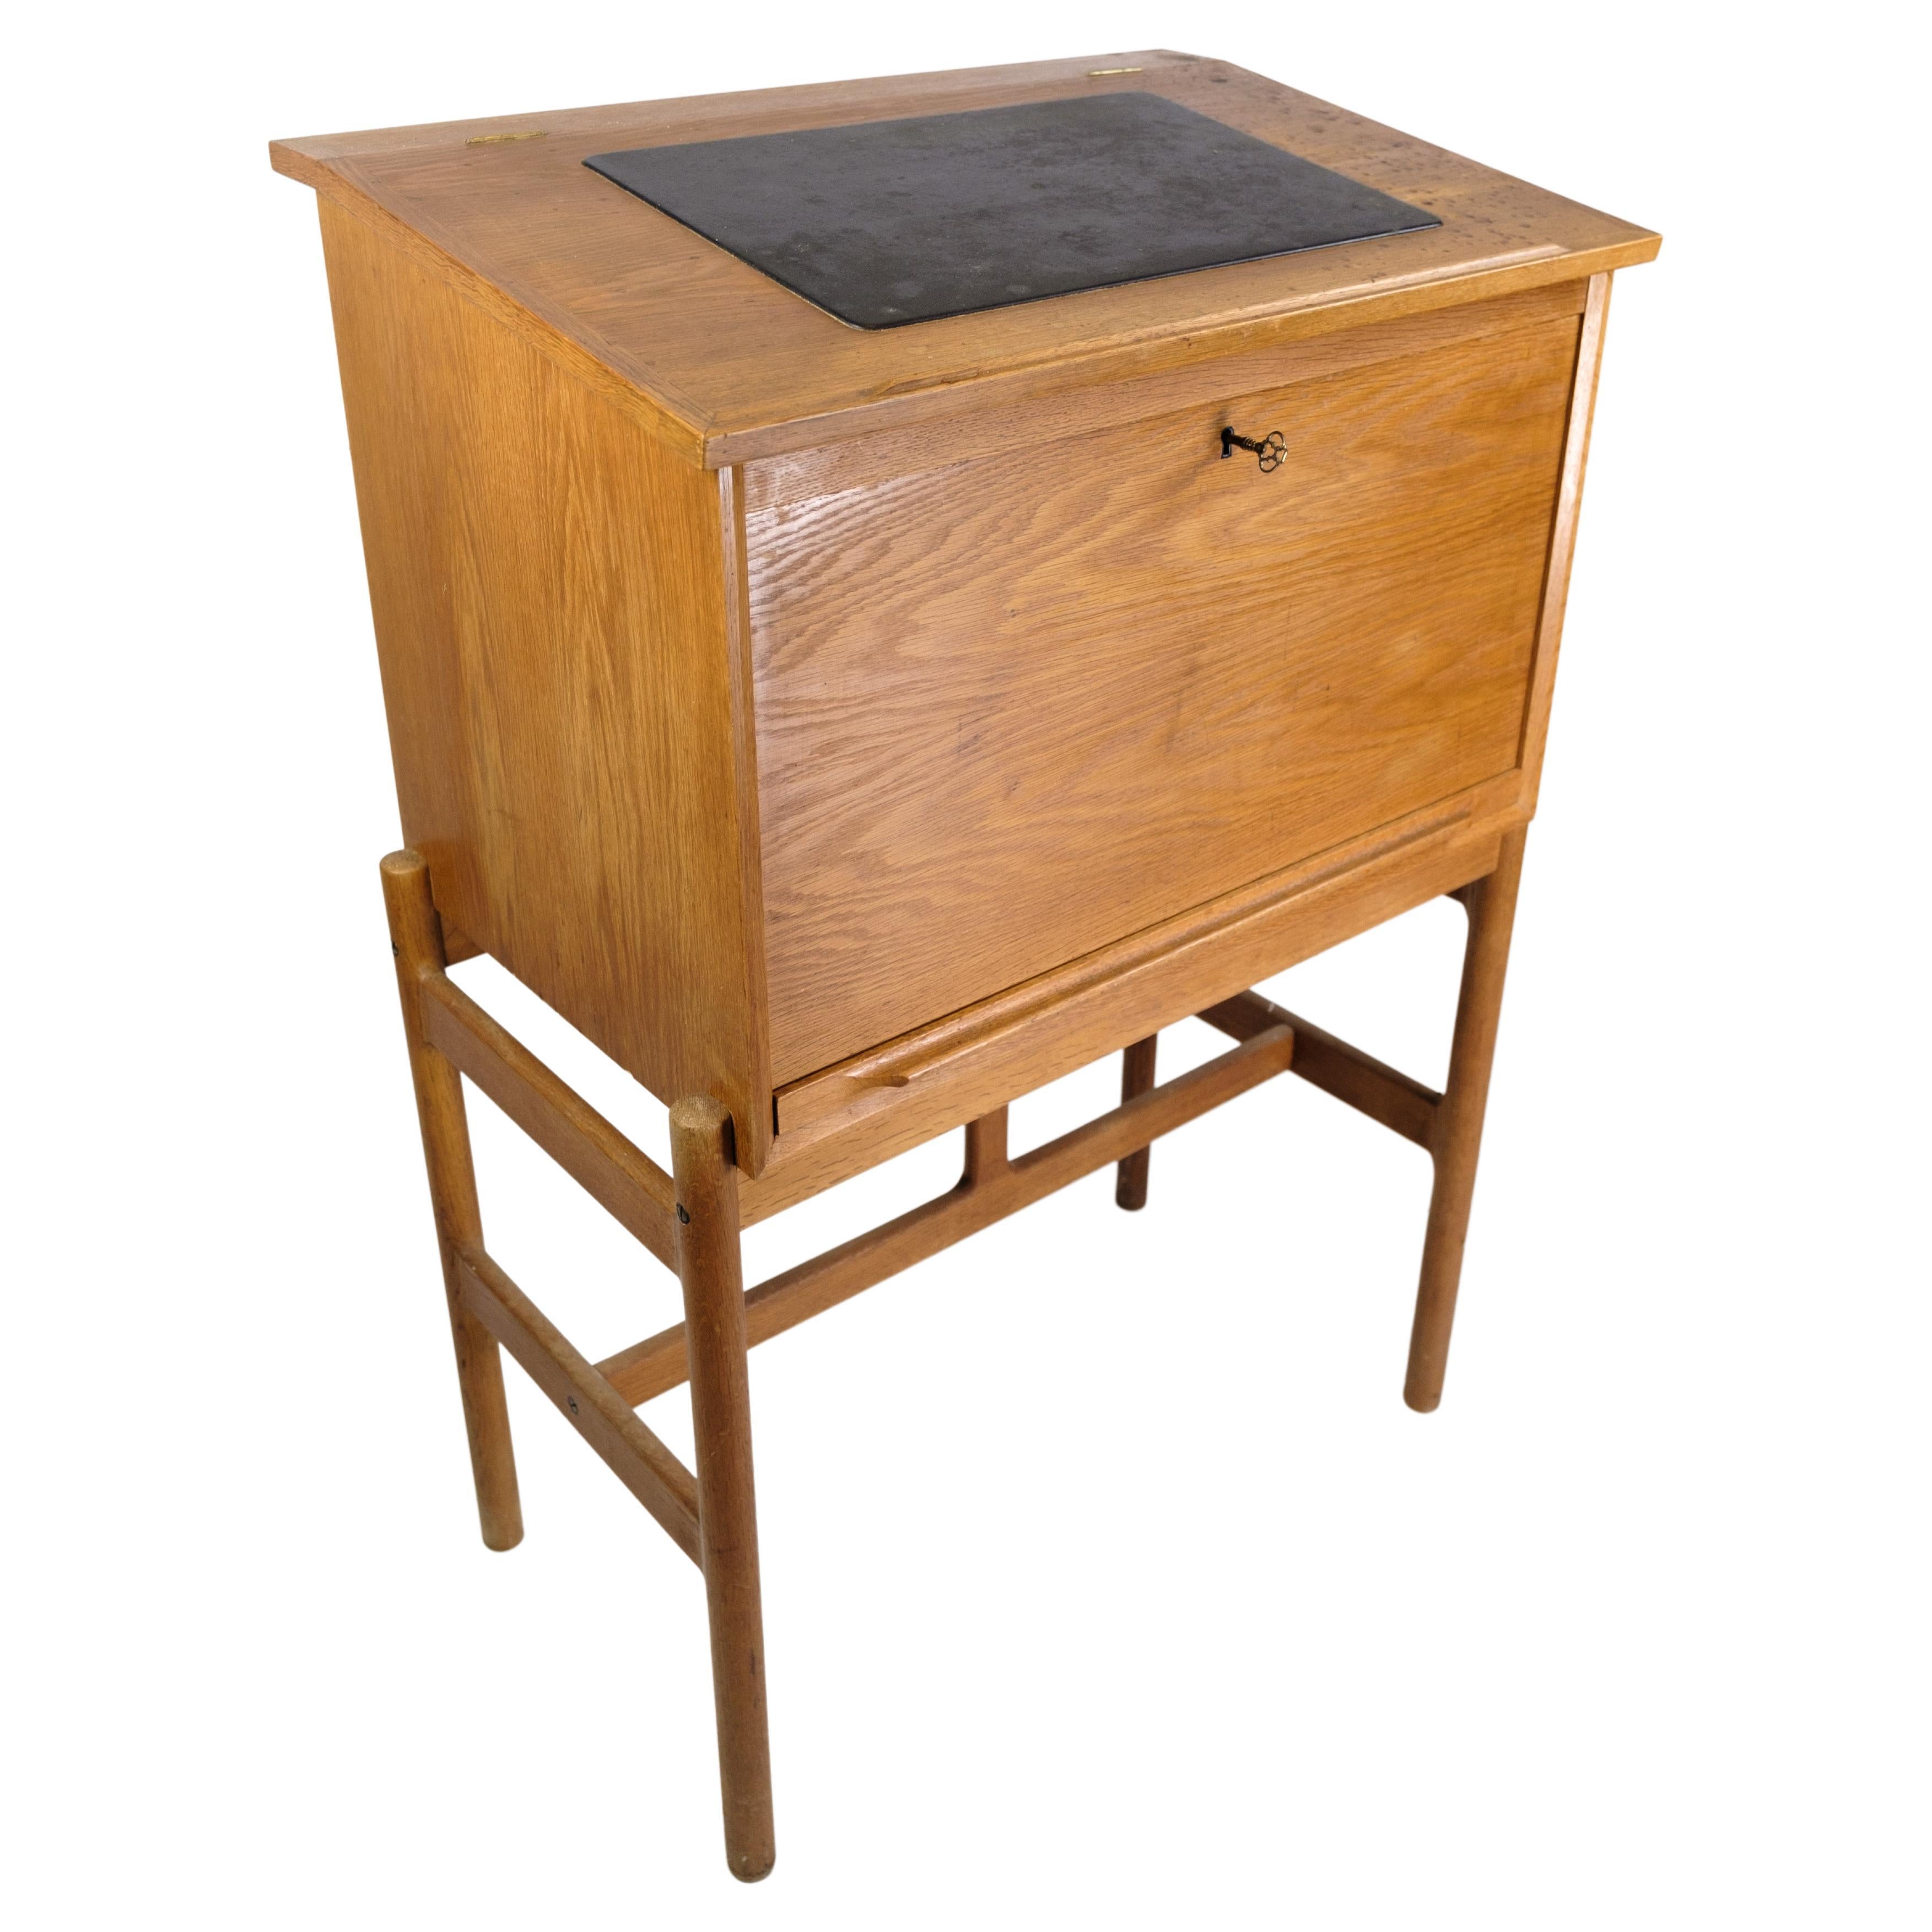 This oak desk, designed by Rosengran Hansen and manufactured by Brande Møbelindustri around the 1960s, is a classic example of Danish furniture design. With its timeless appeal and functional design, it is sure to enhance any workspace.

Crafted